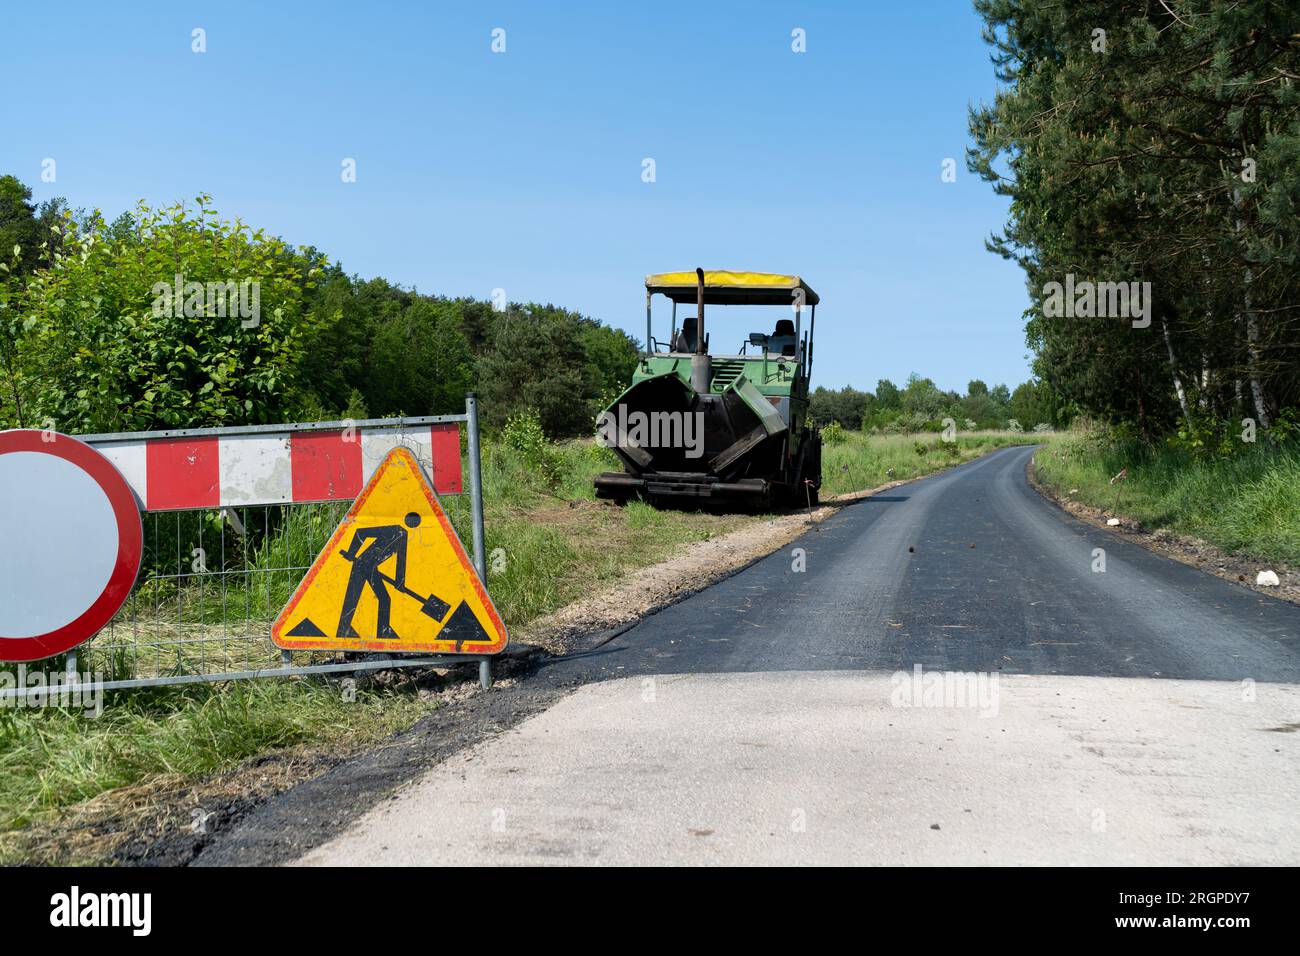 Road work ahead warning sign on a fence of new road construction site. Paver finisher equipment in bg. Crawler paving machine for laying asphalt. Stock Photo